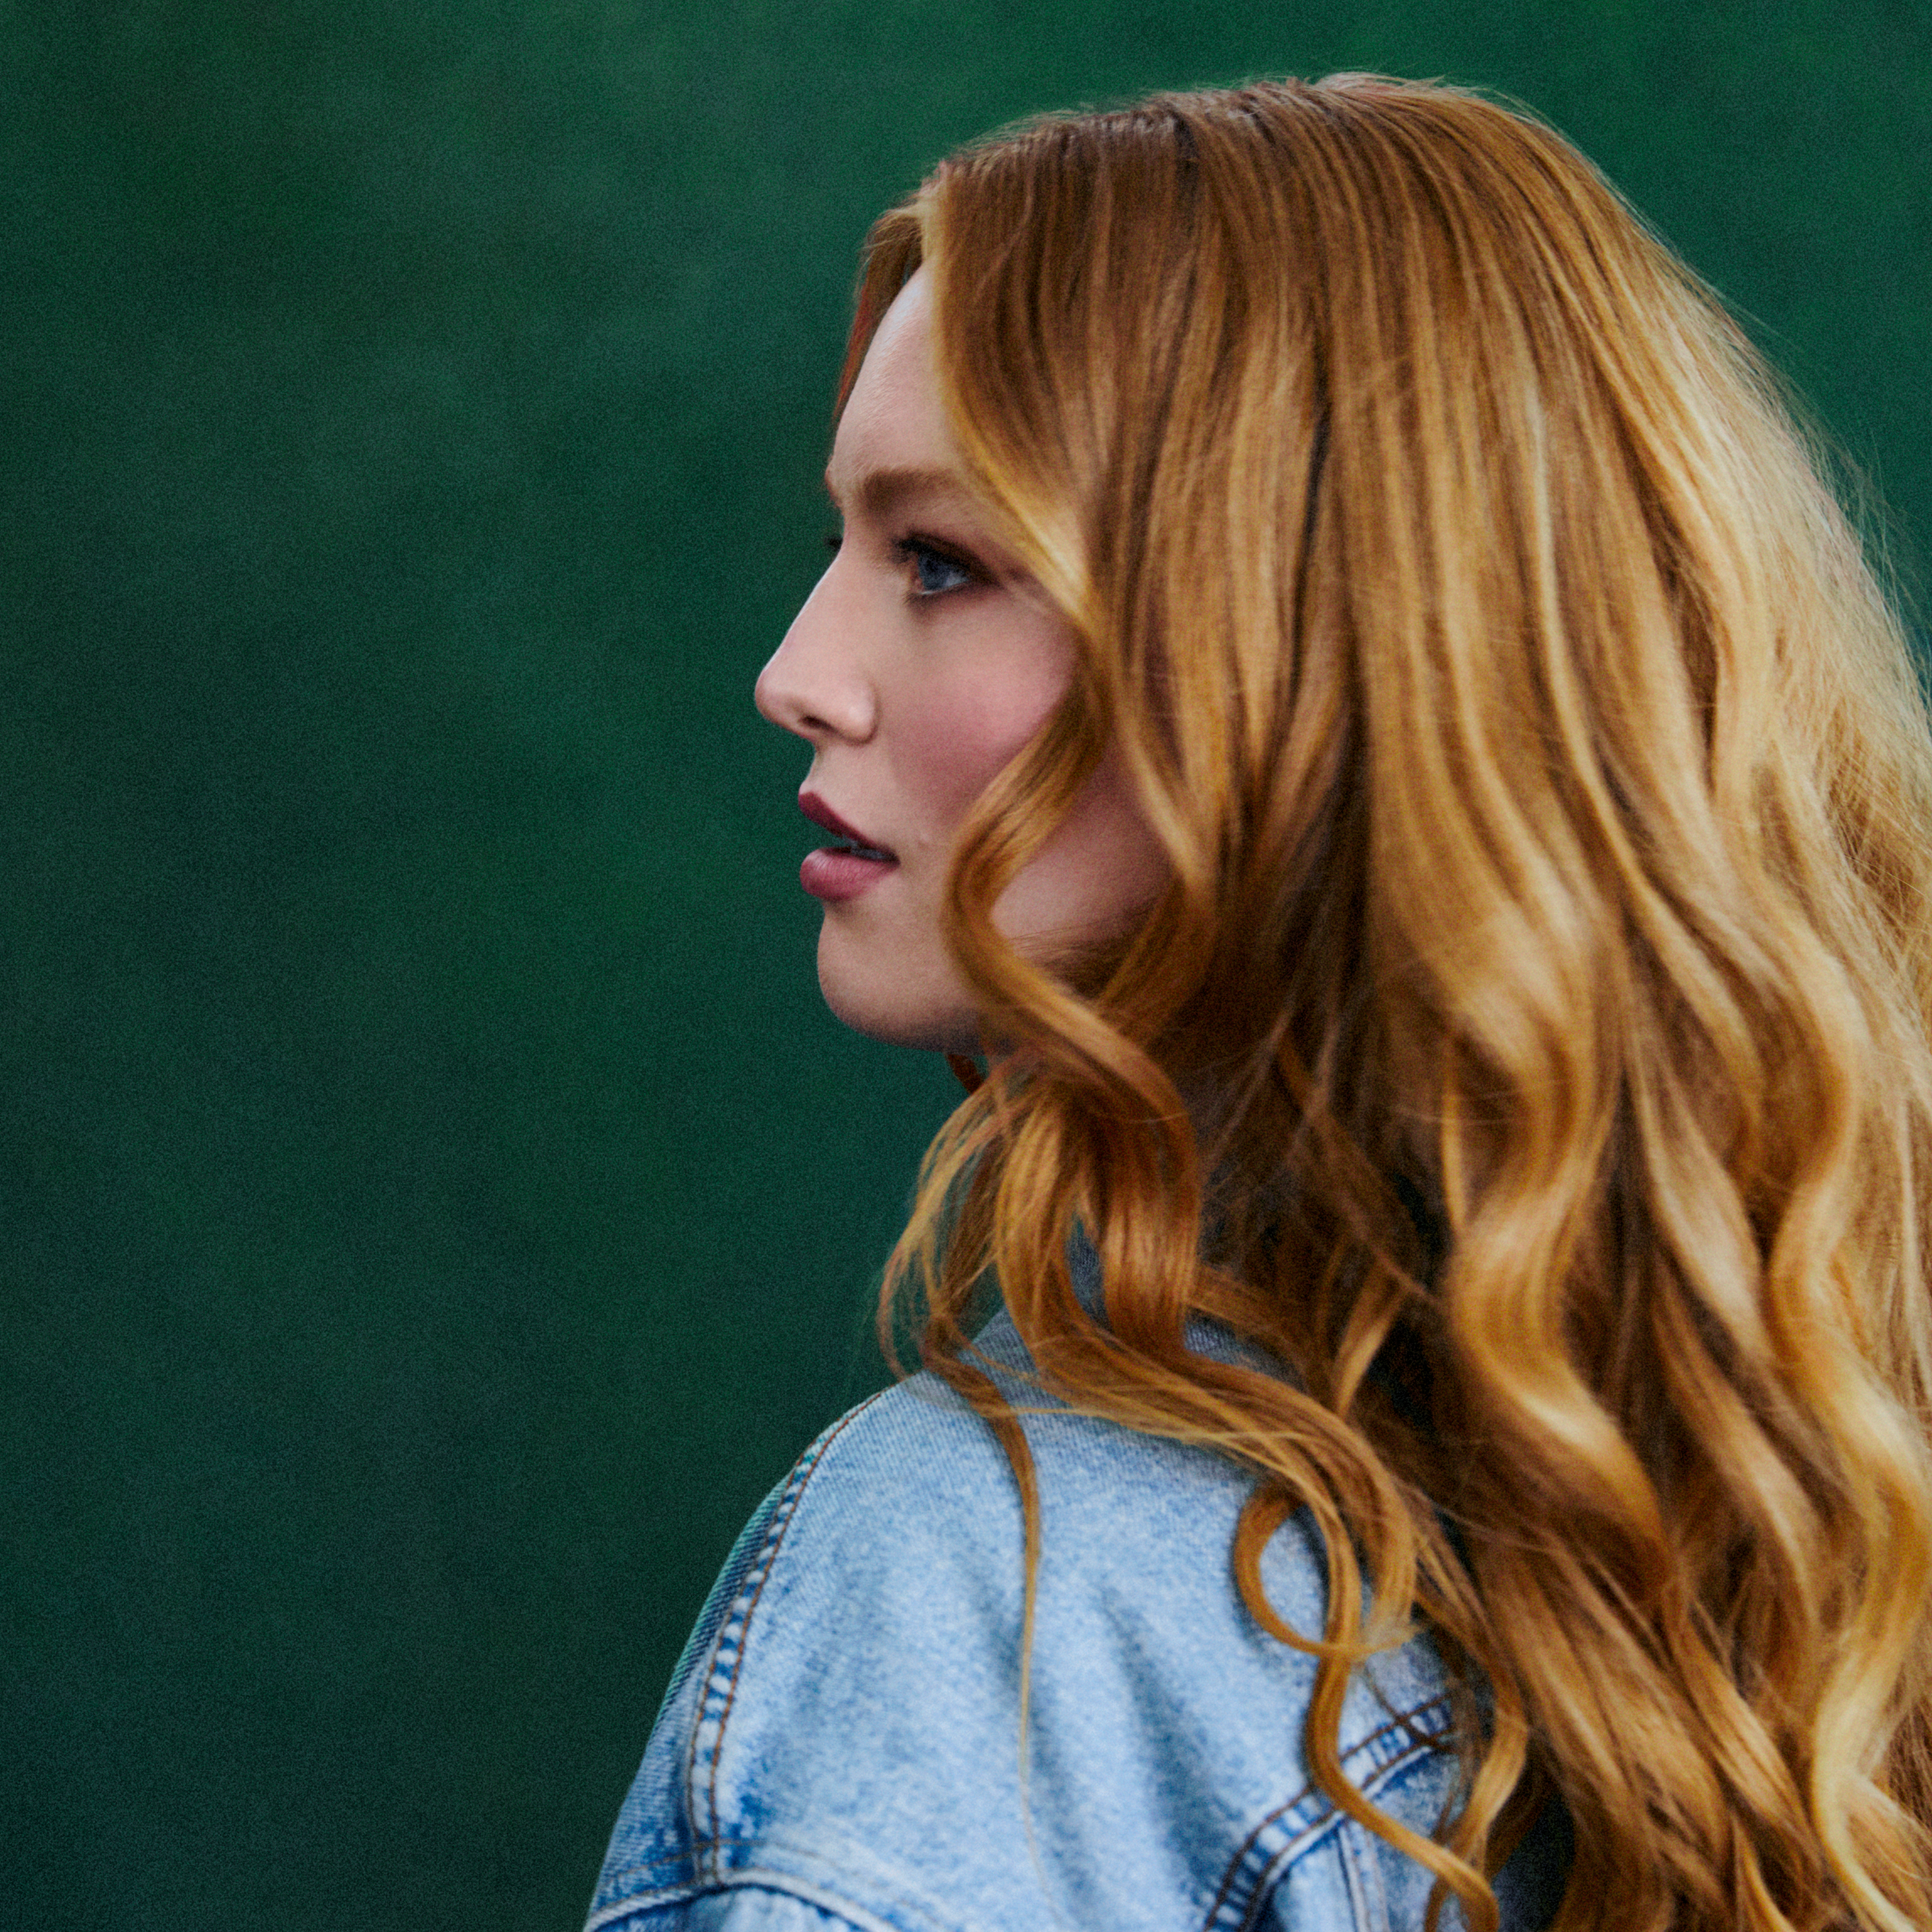 Freya Ridings returns to Limerick for a "Live at The Big Top" show in The Milk Market this September to promote her new album Blood Orange